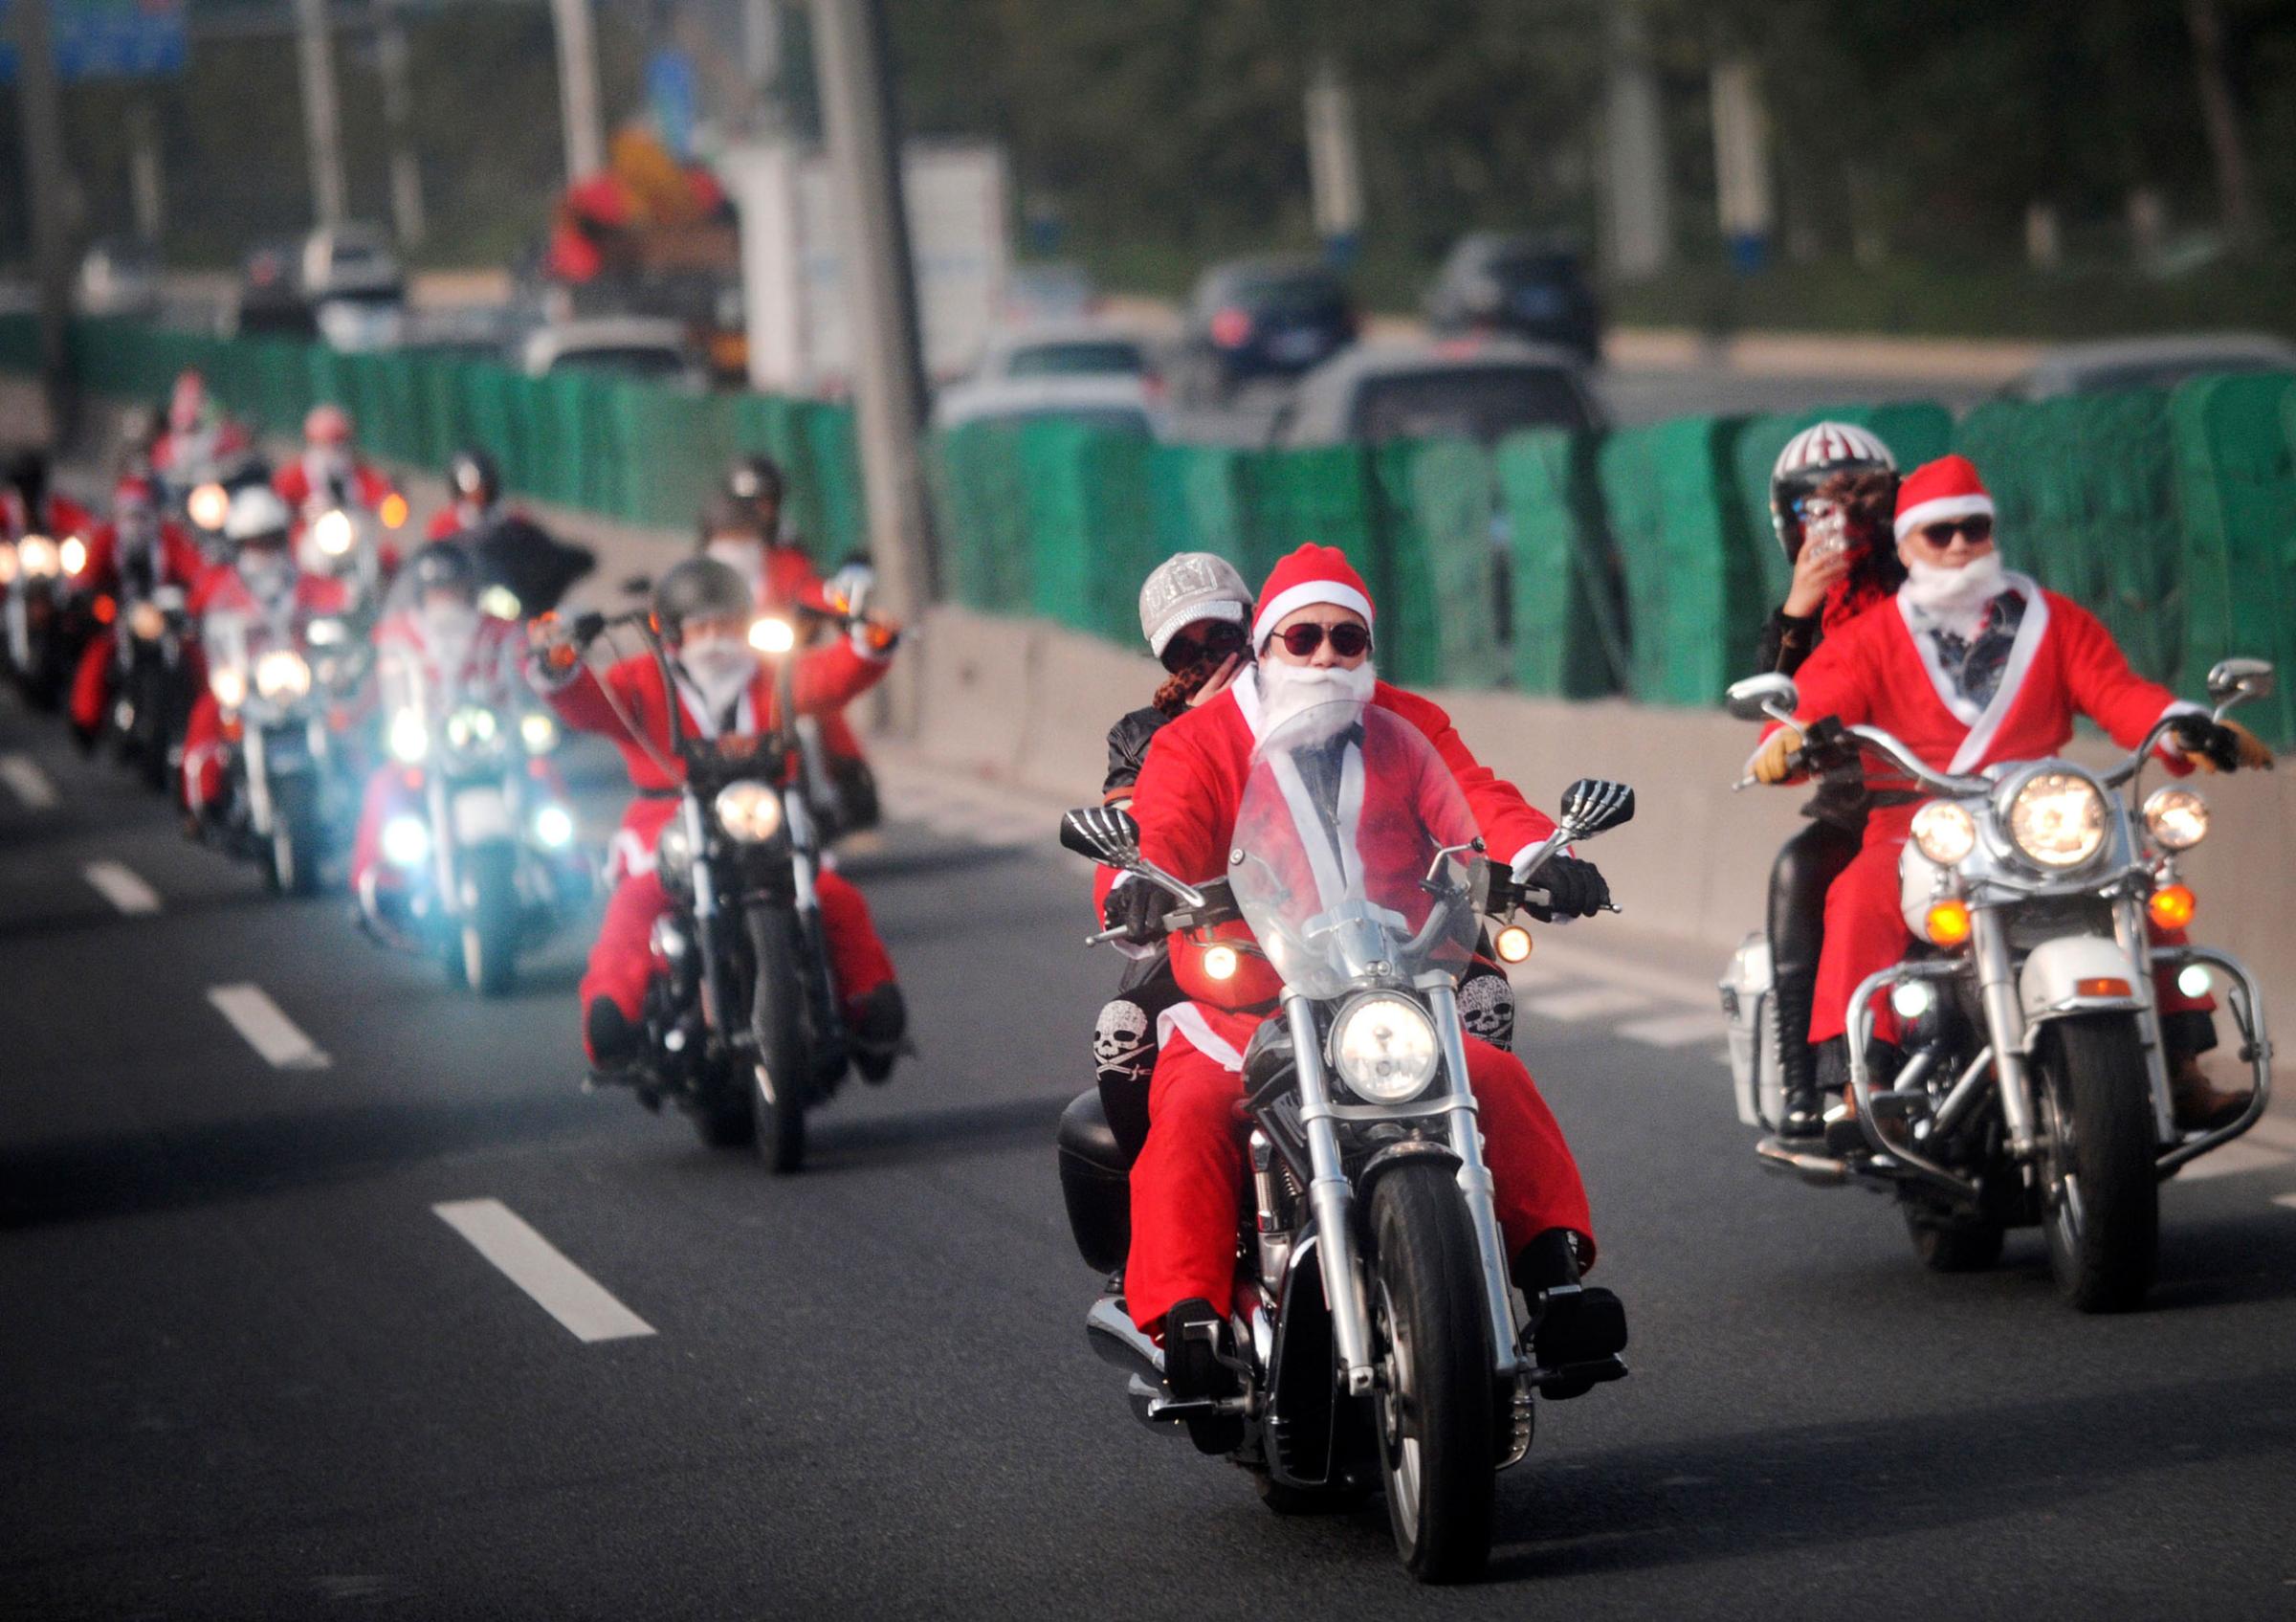 Owners of Harley-Davidson motorcycles wearing Santa Claus costumes ride along a street to give presents to elders at a nursing home during a promotional event celebrating Christmas in Guangzhou, Guangdong province on Dec. 24, 2014.